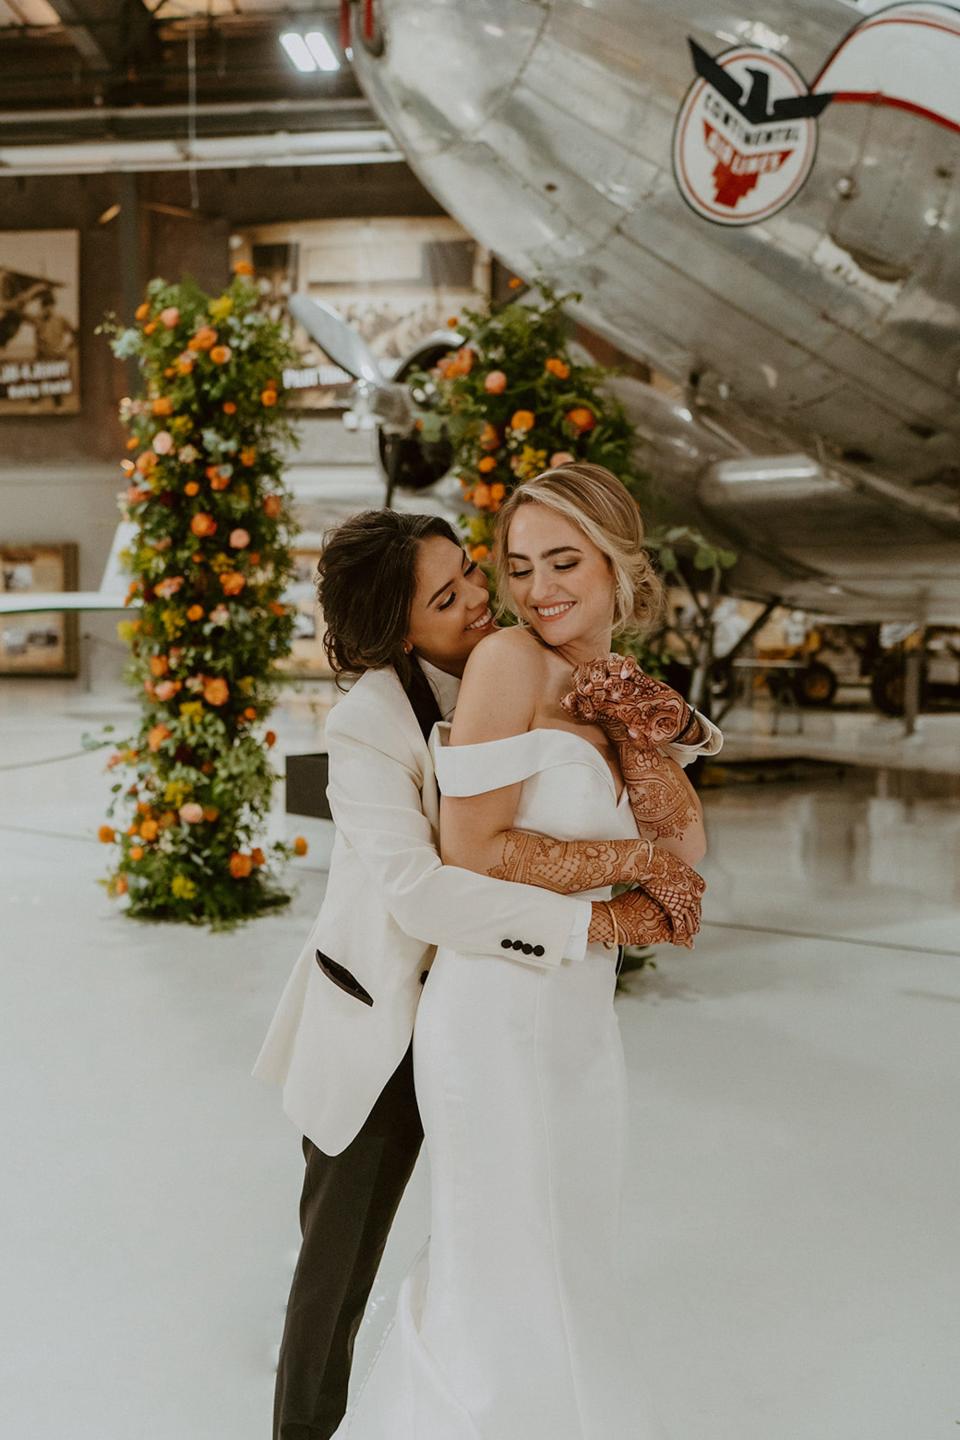 A bride hugs her wife from behind in front of a floral archway and plane.